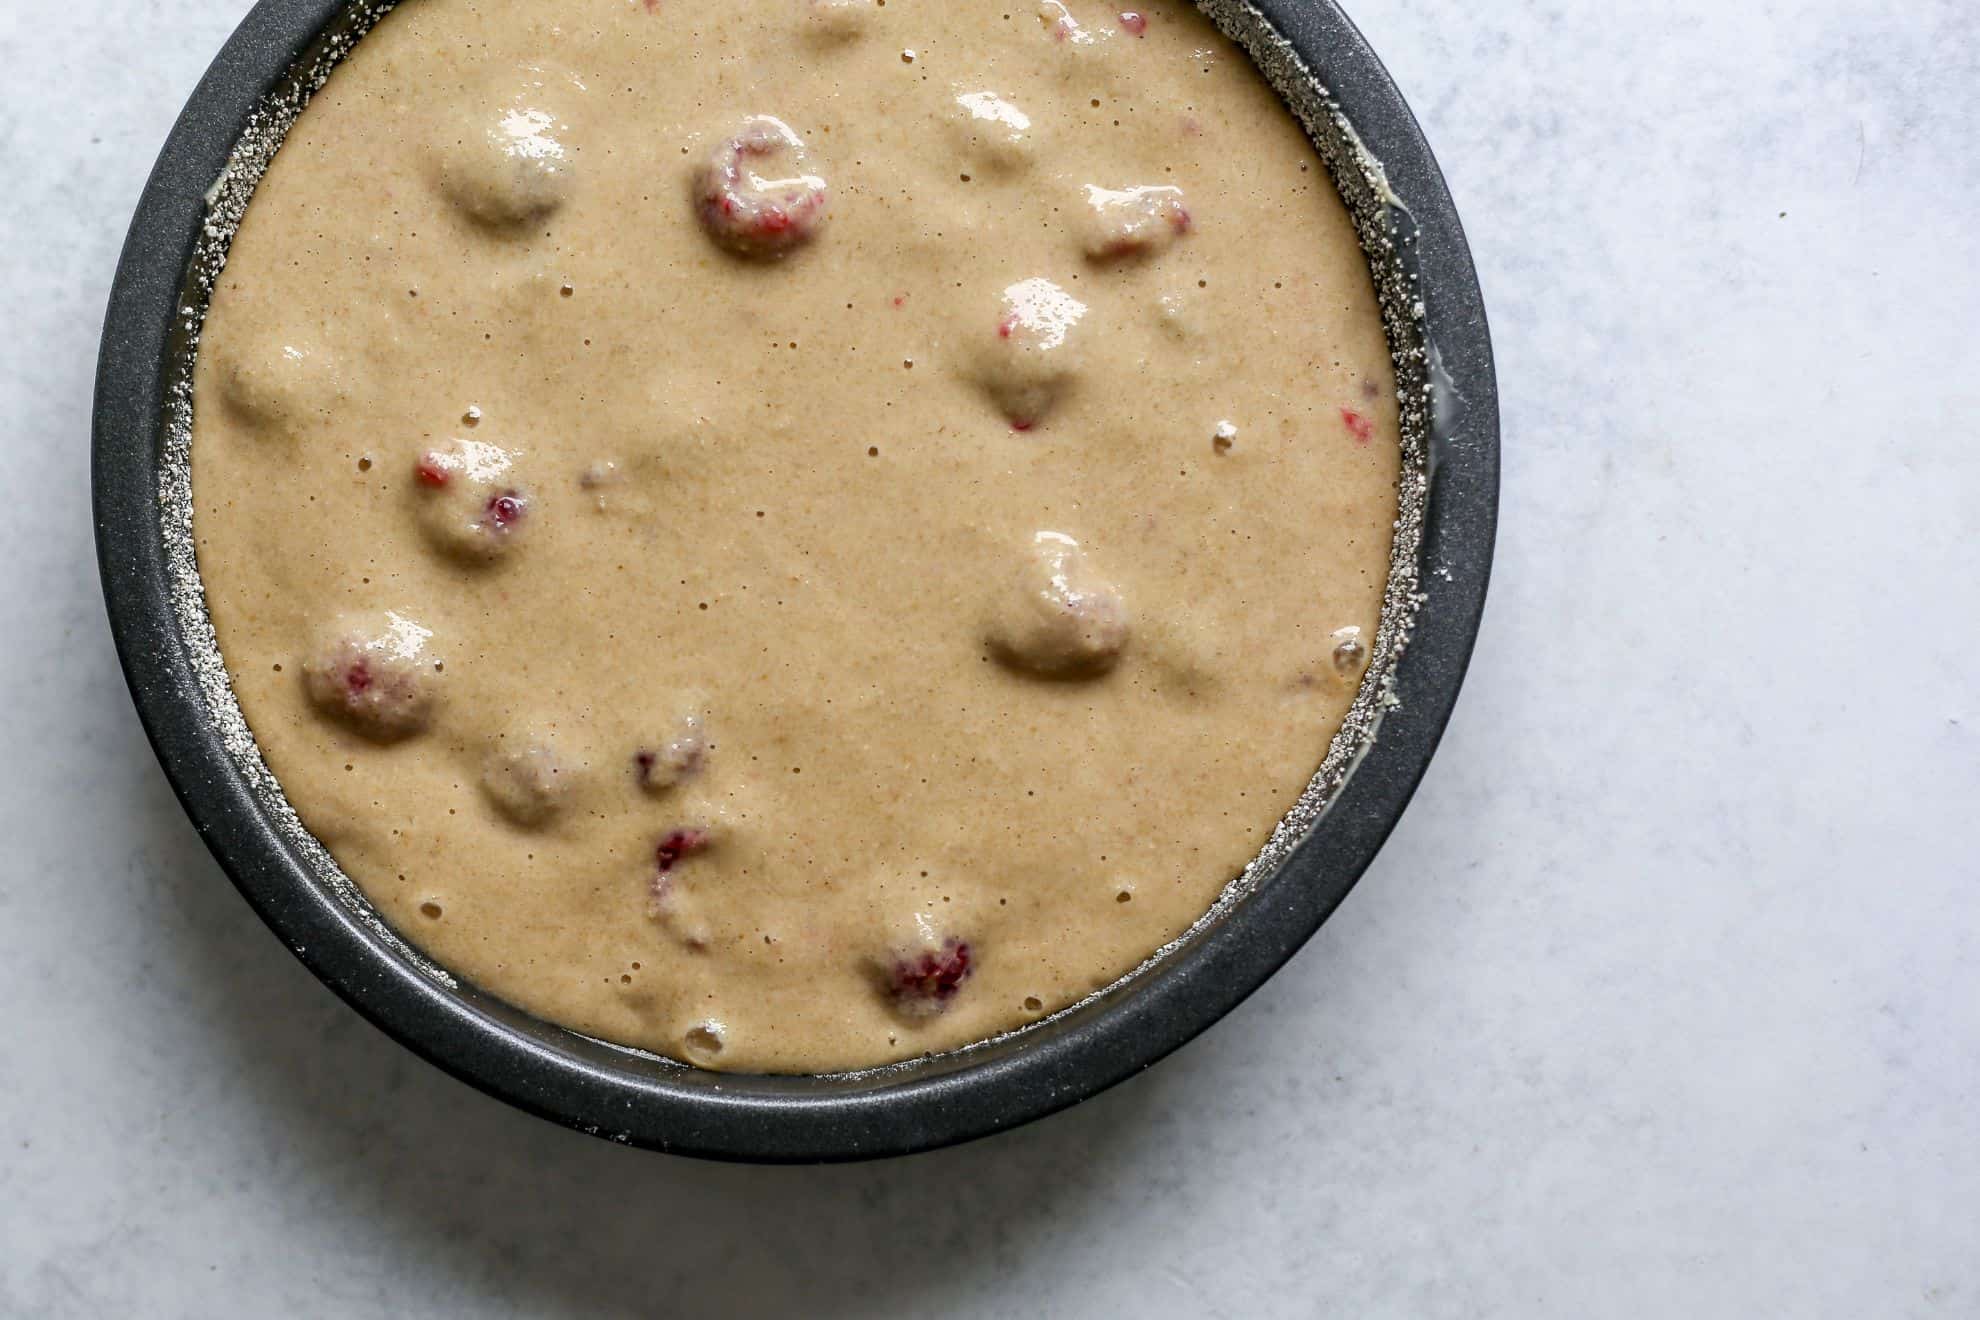 This is an overhead image of a circle pan with raw raspberry cake batter in it. You can see the raw raspberries coated with batter. The pan sits on a white counter.